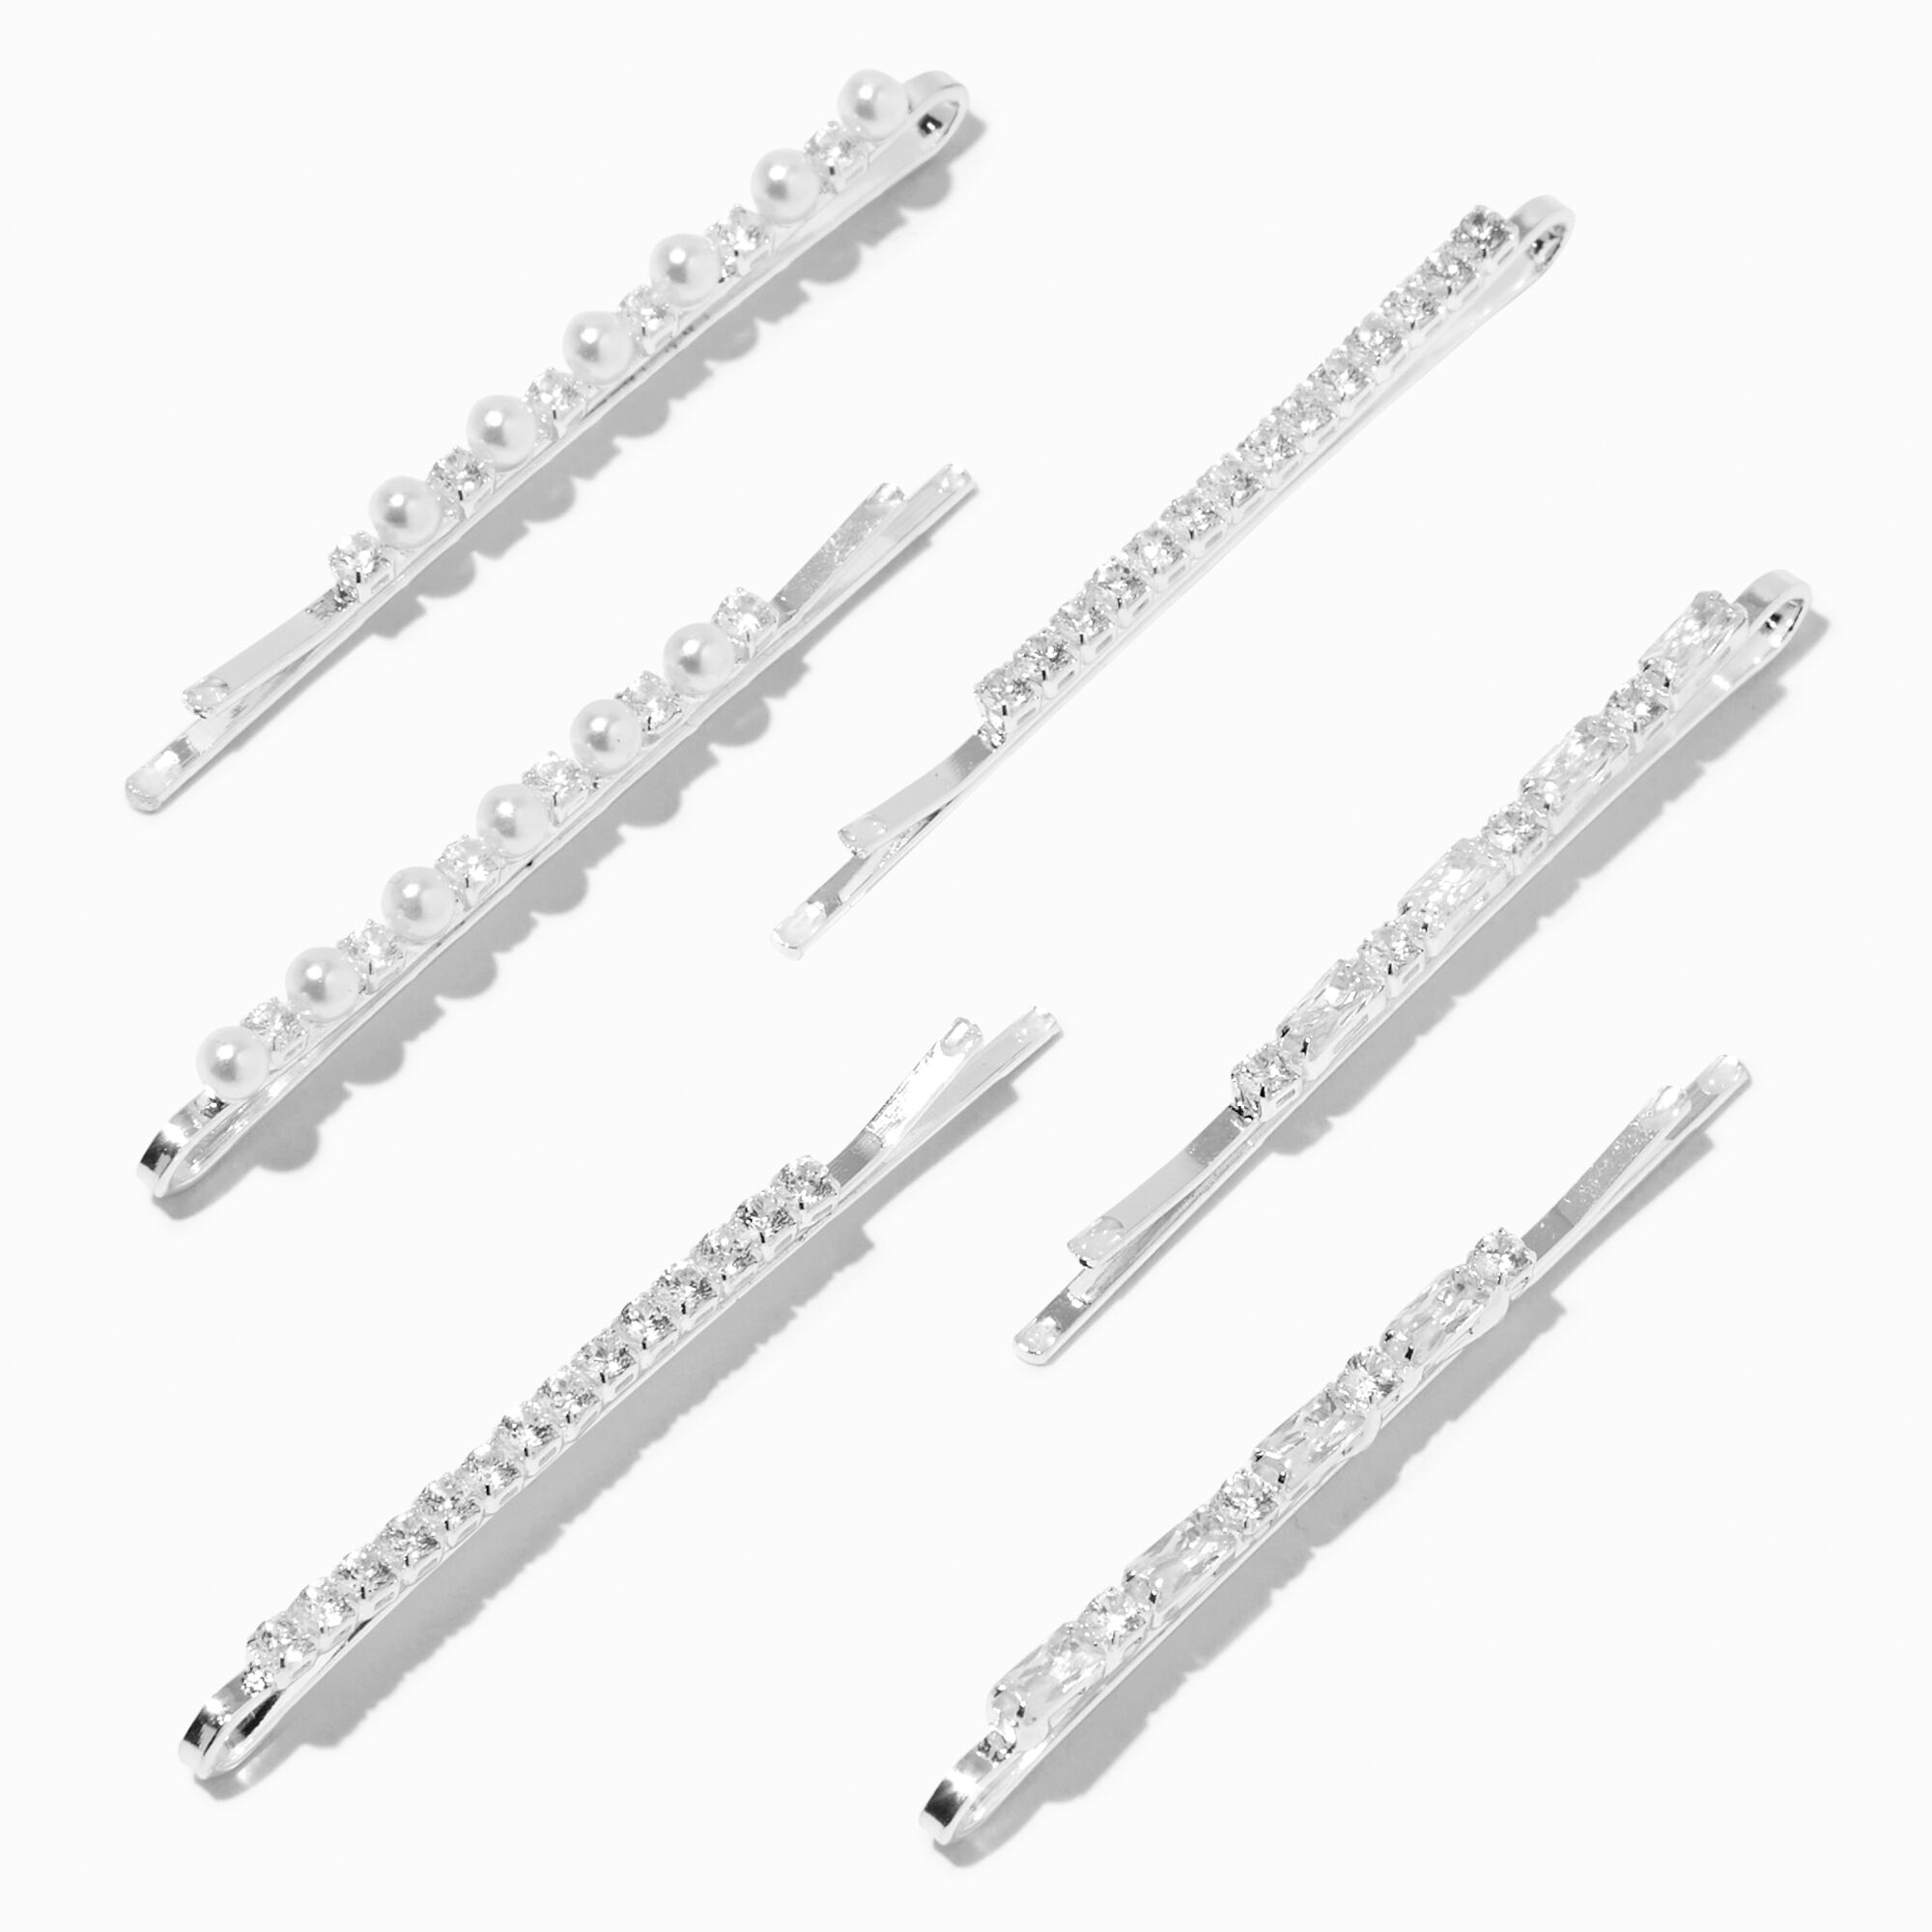 View Claires Tone Pearl Crystal Bobby Pins 6 Pack Silver information